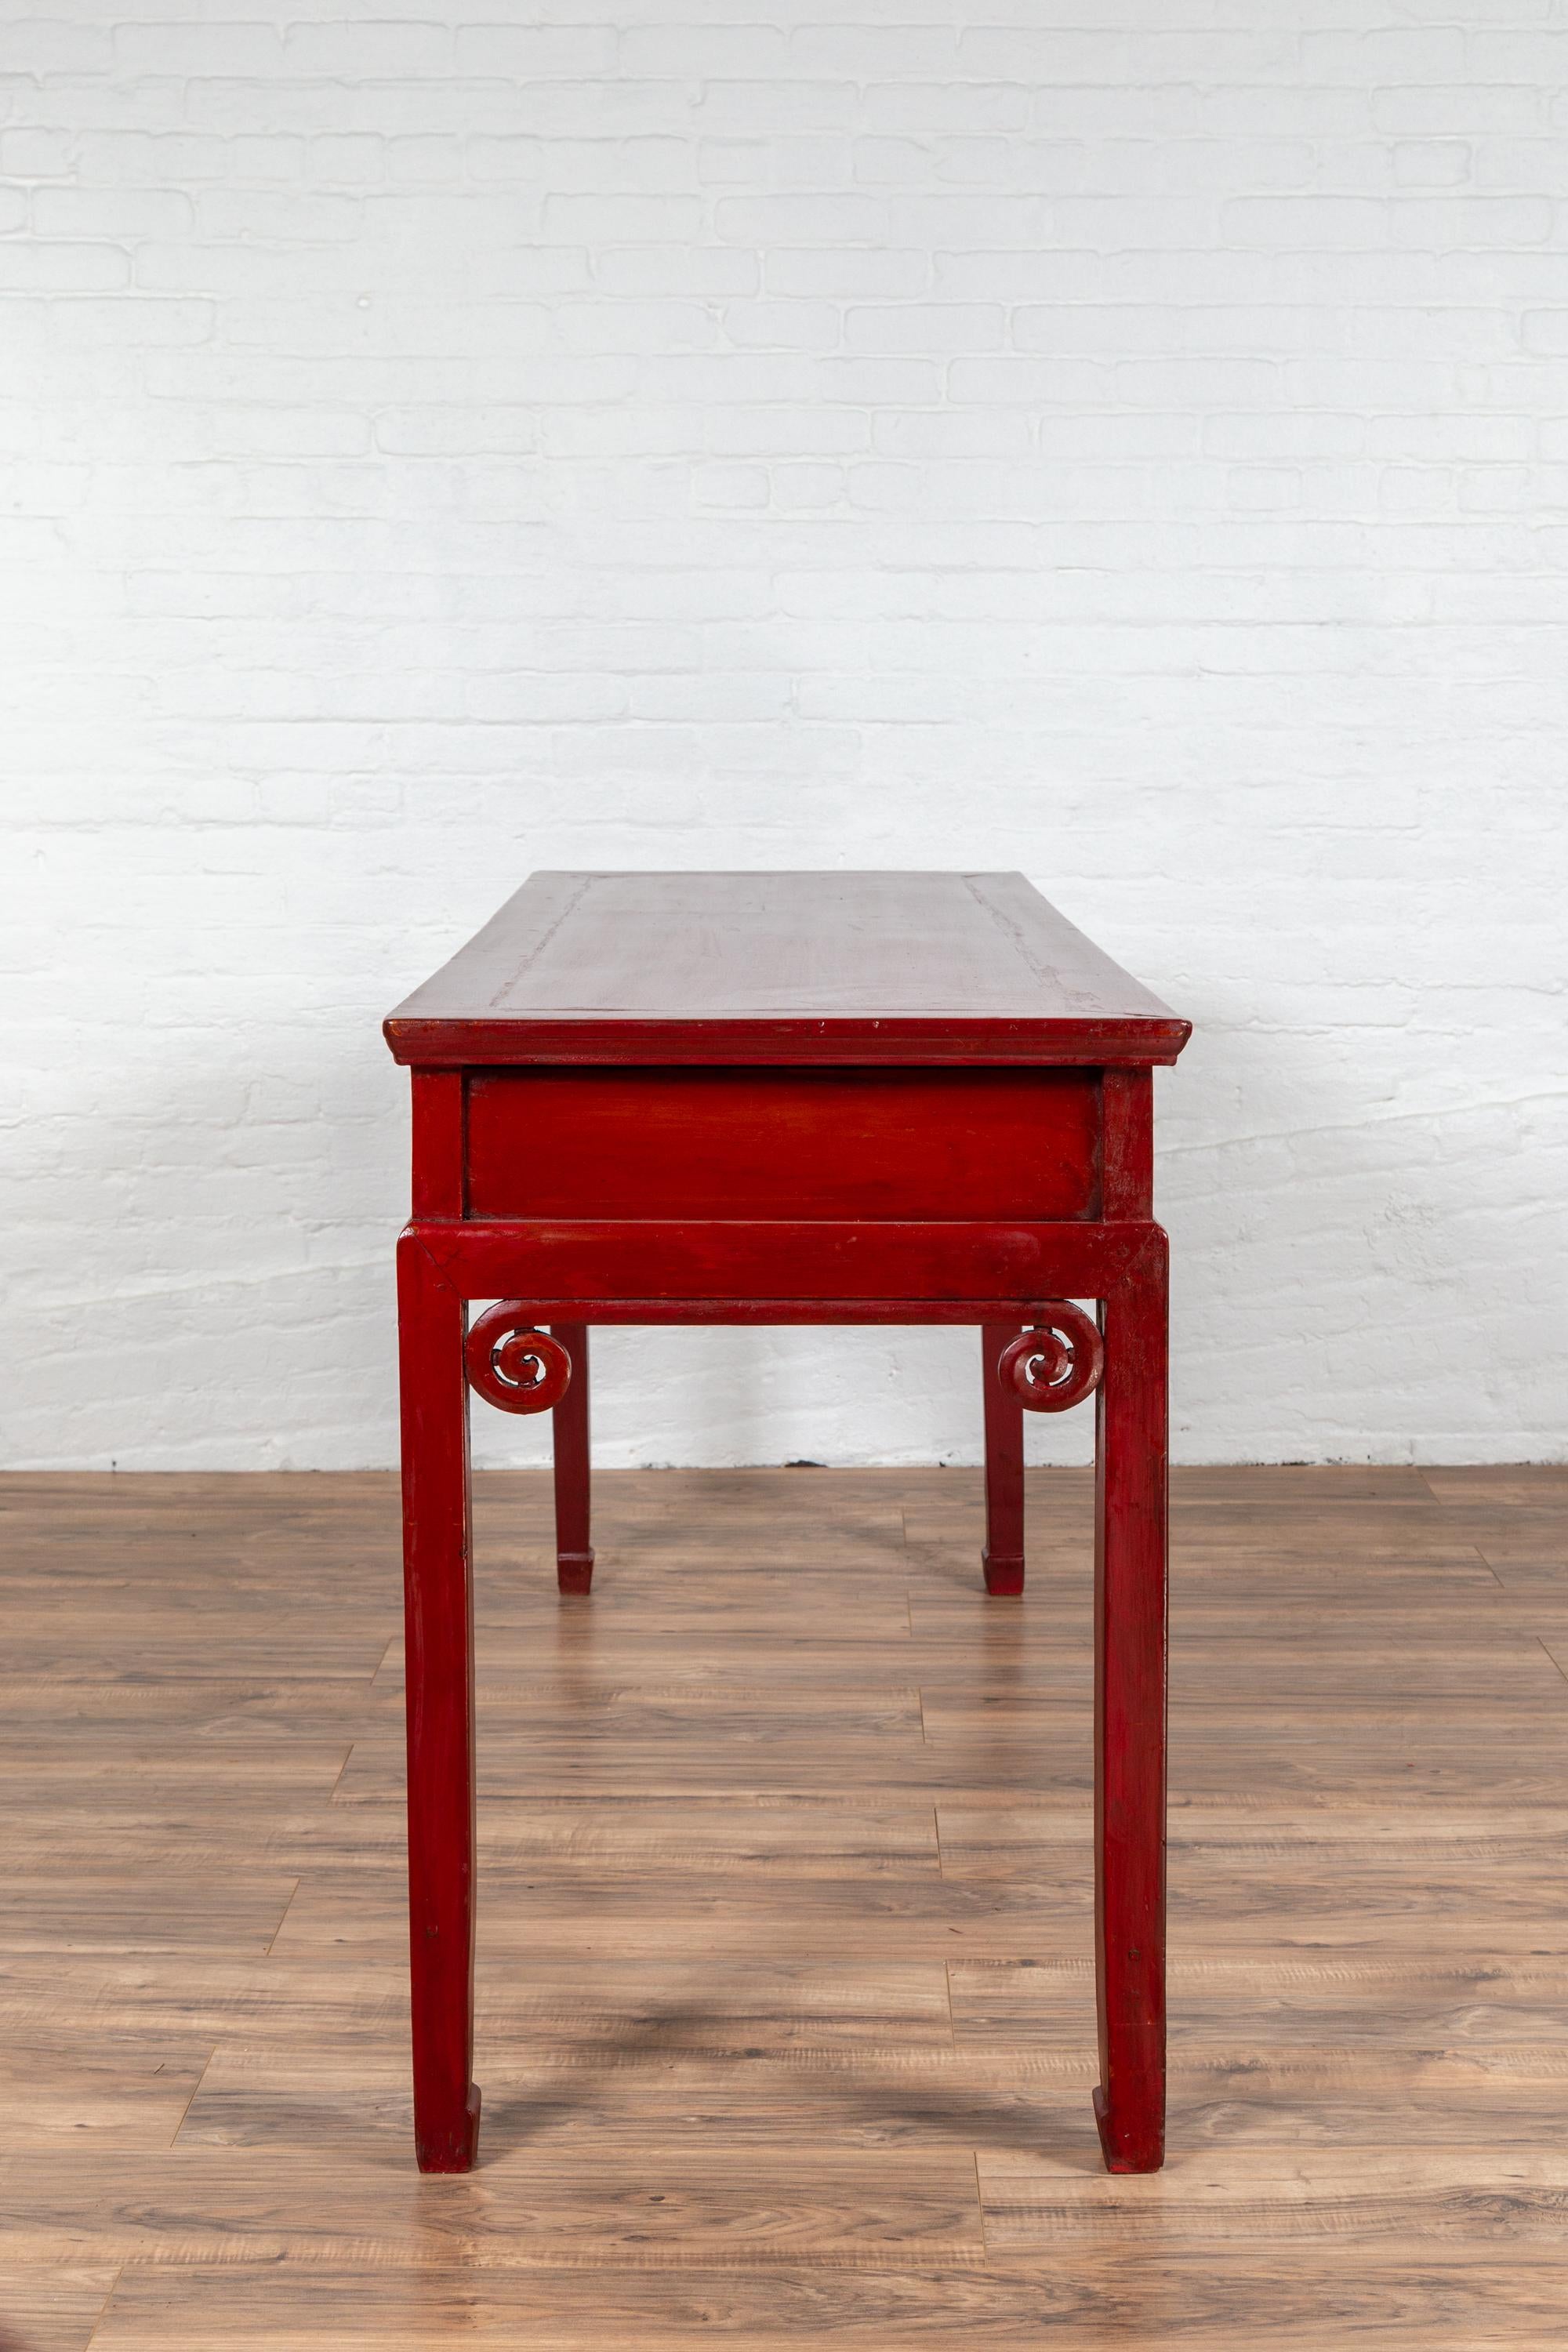 Chinese Antique Red Lacquered Wooden Desk with Four Drawers and Curling Scrolls 10